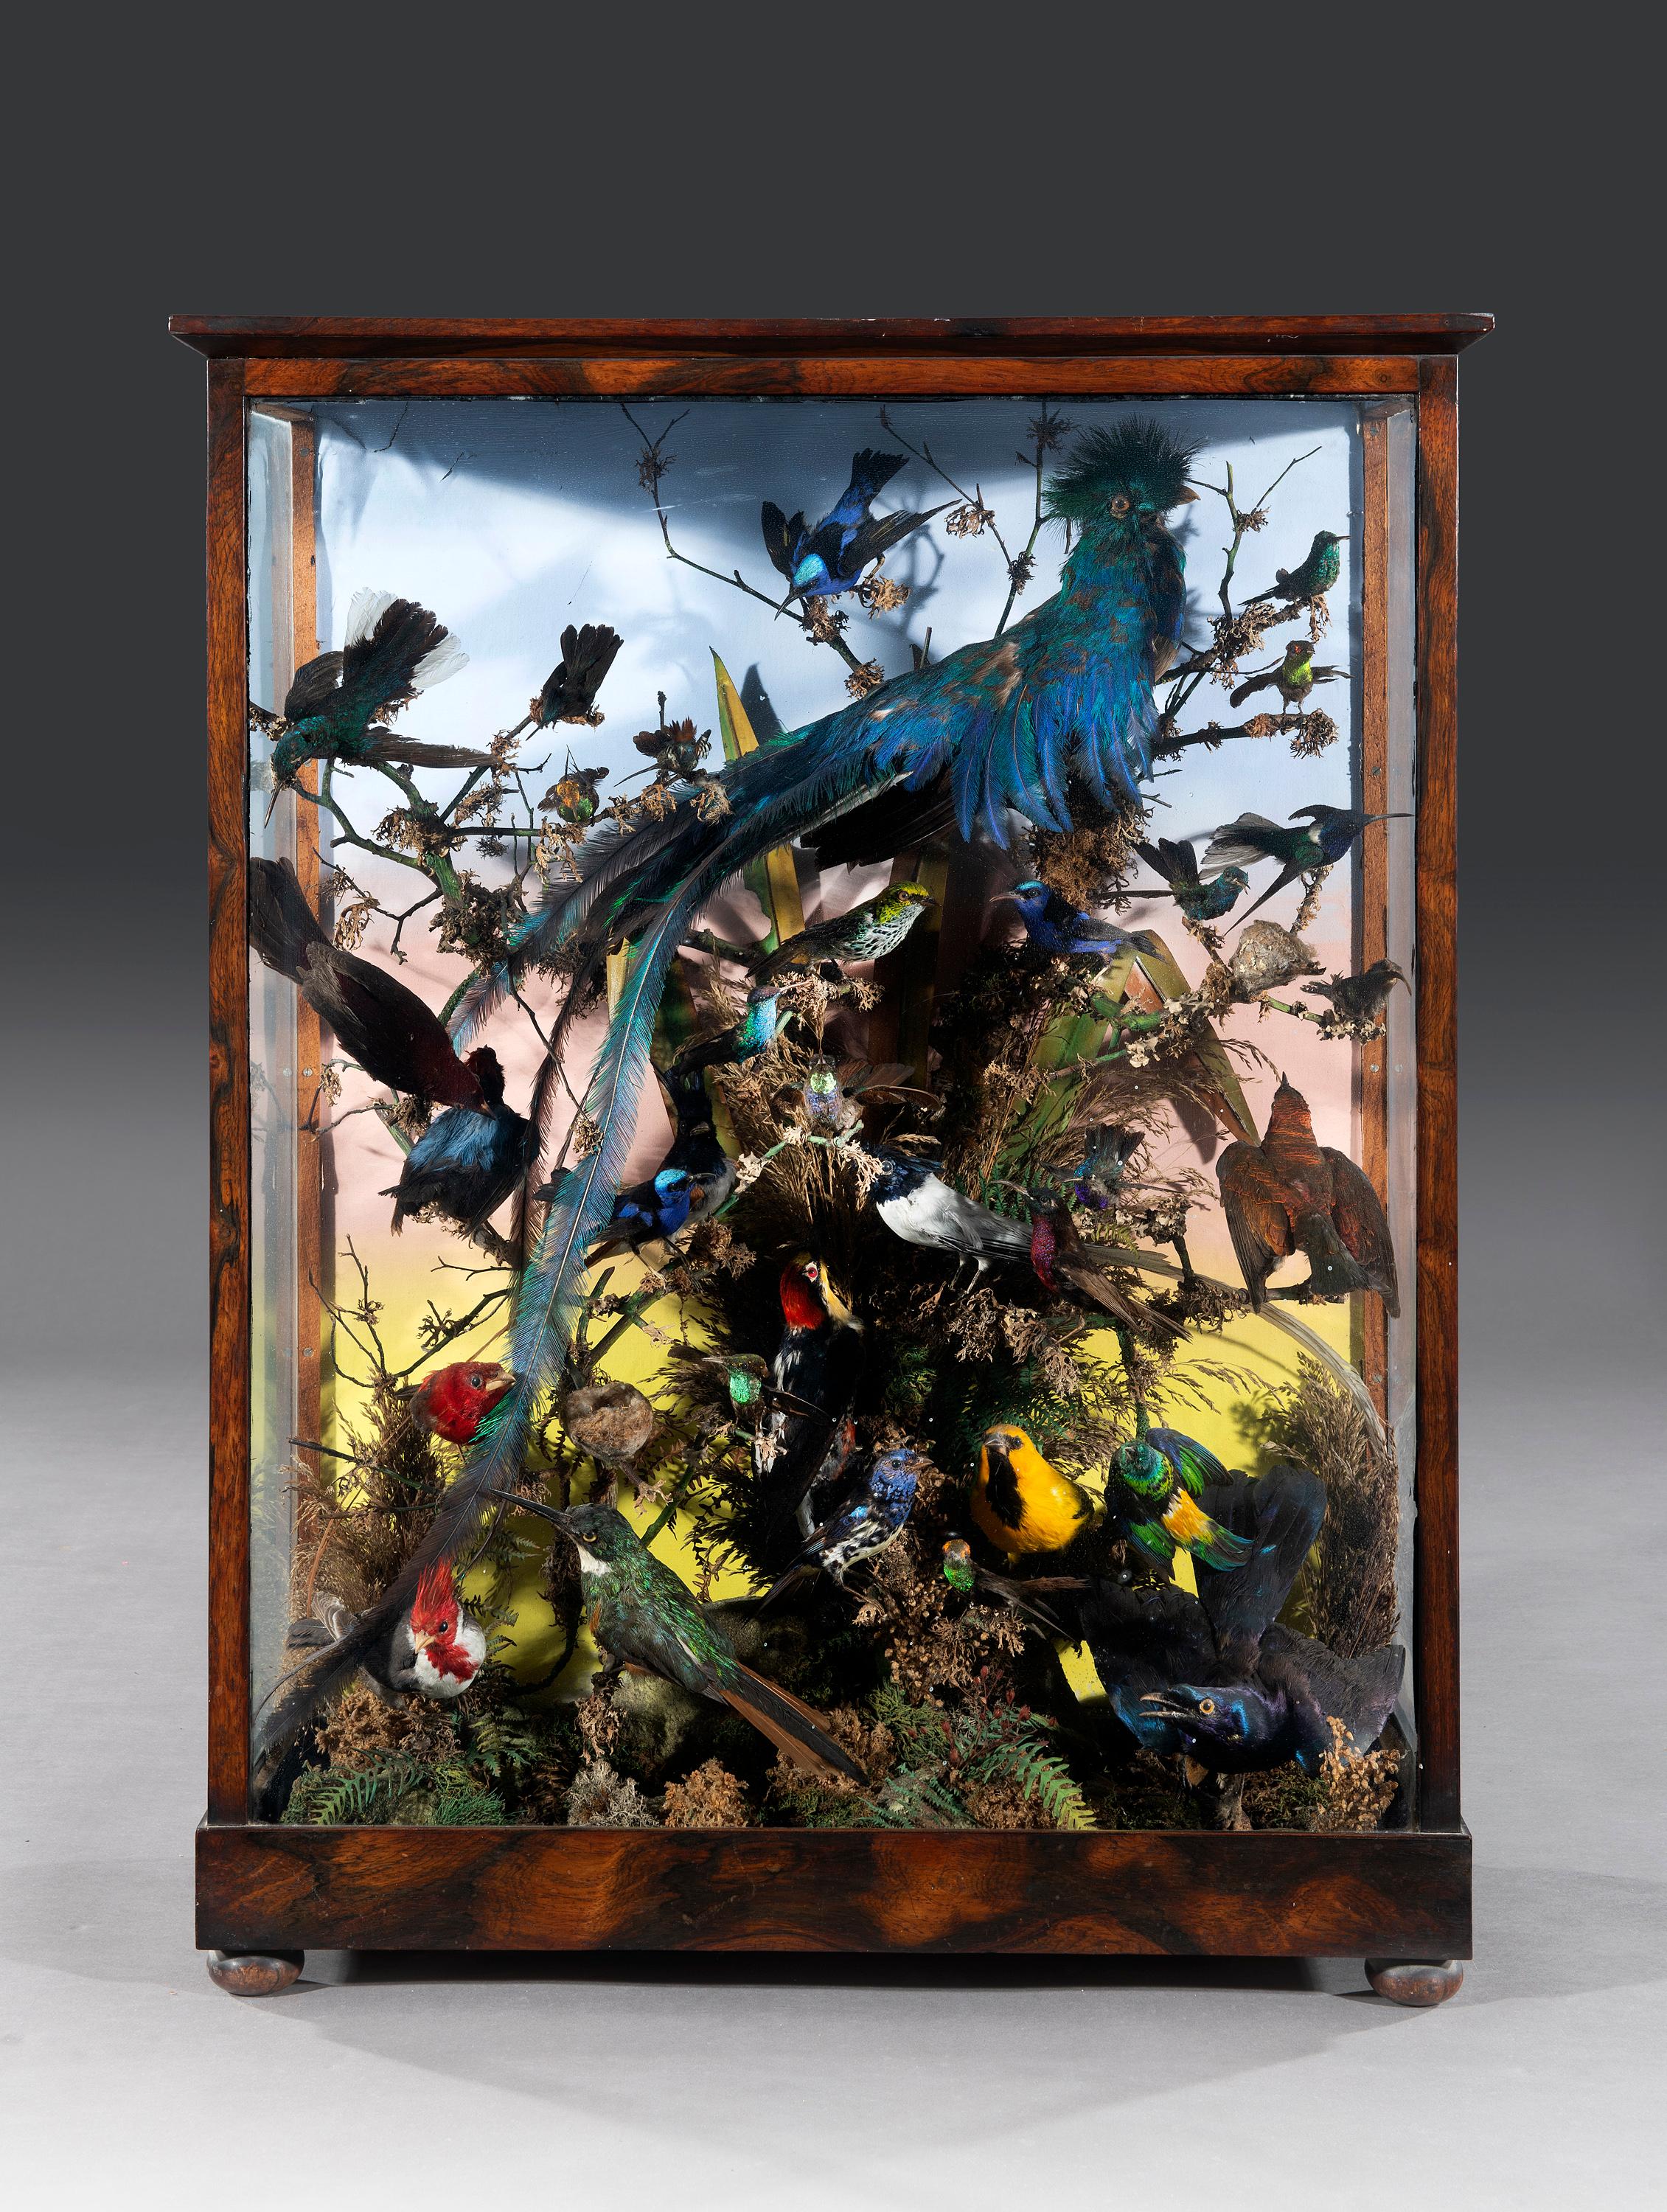 The various exotic birds are preserved and mounted in a naturalistic setting with reeds and rocks and mounted in a glazed and sealed rosewood cabinet. 

We have identified in the following birds in the cabinet to the best of our knowledge;

Top